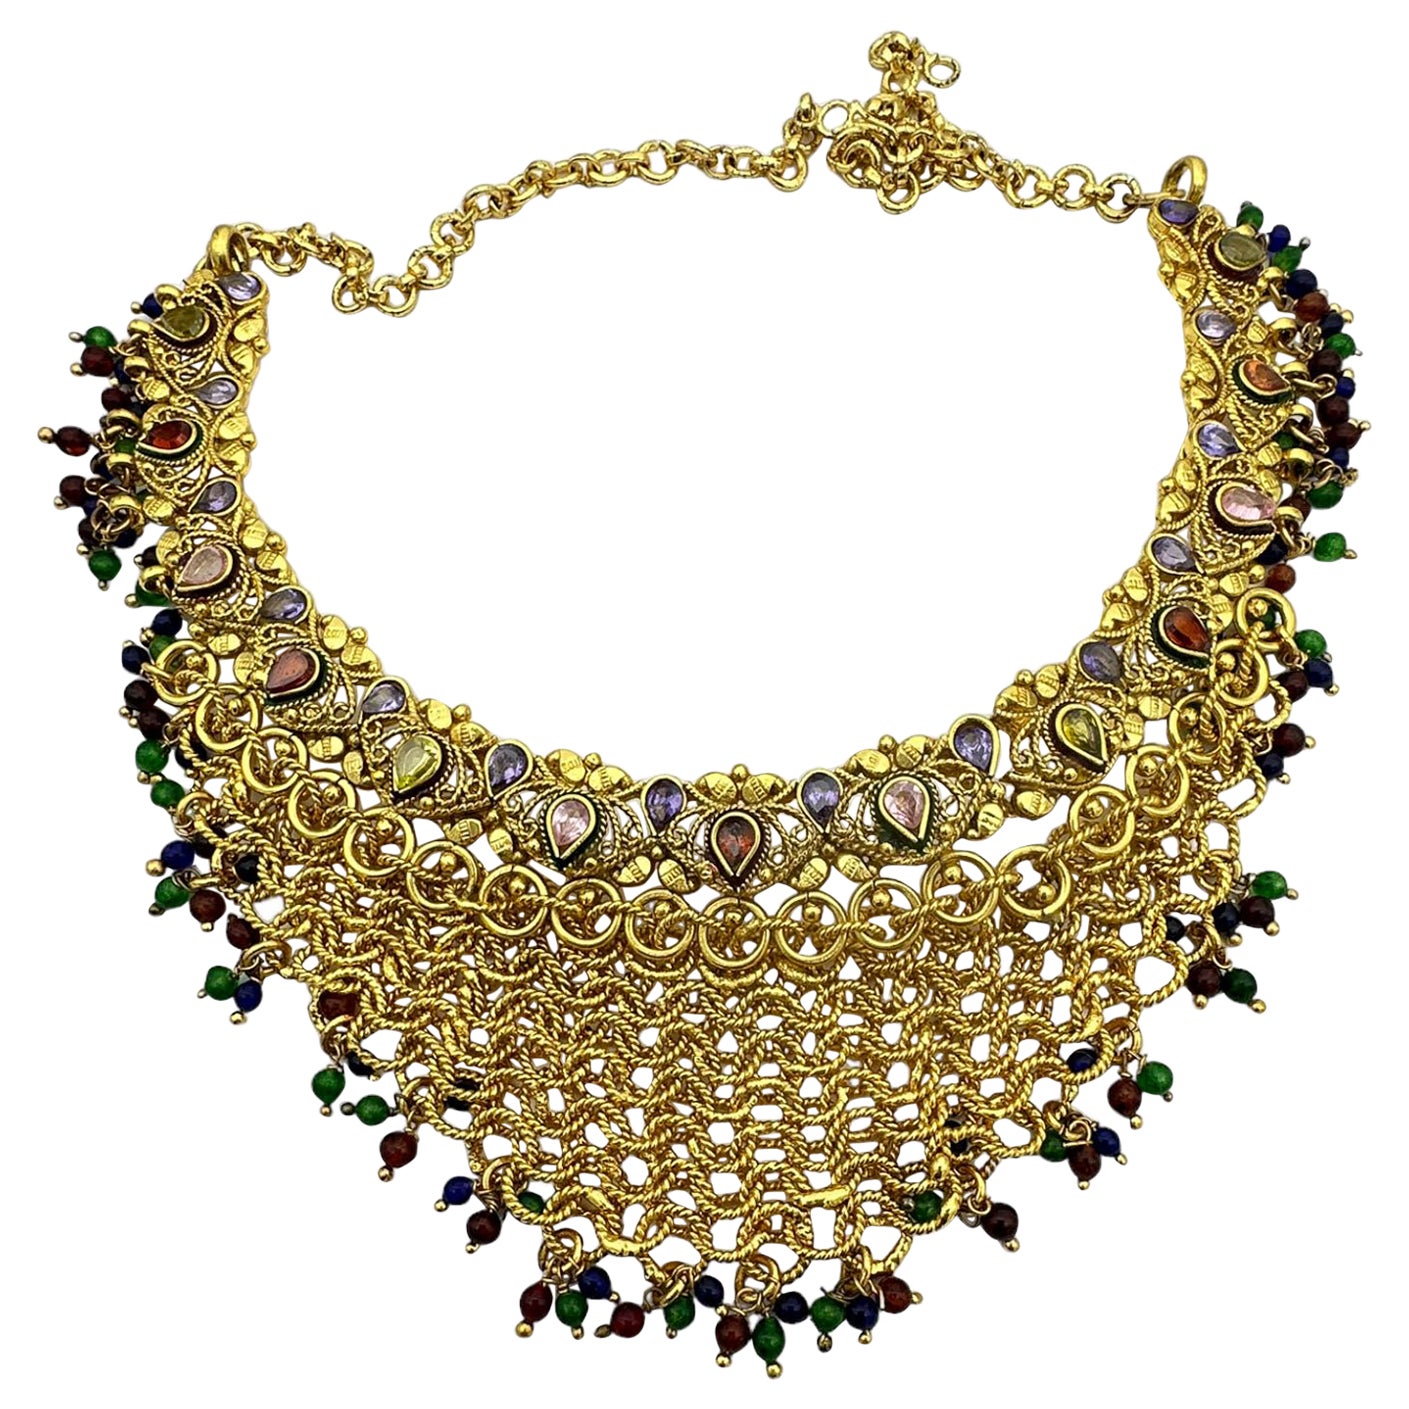 Egyptian Mesh, Jeweled Gem Colored Necklace 24K Electroplated For Sale